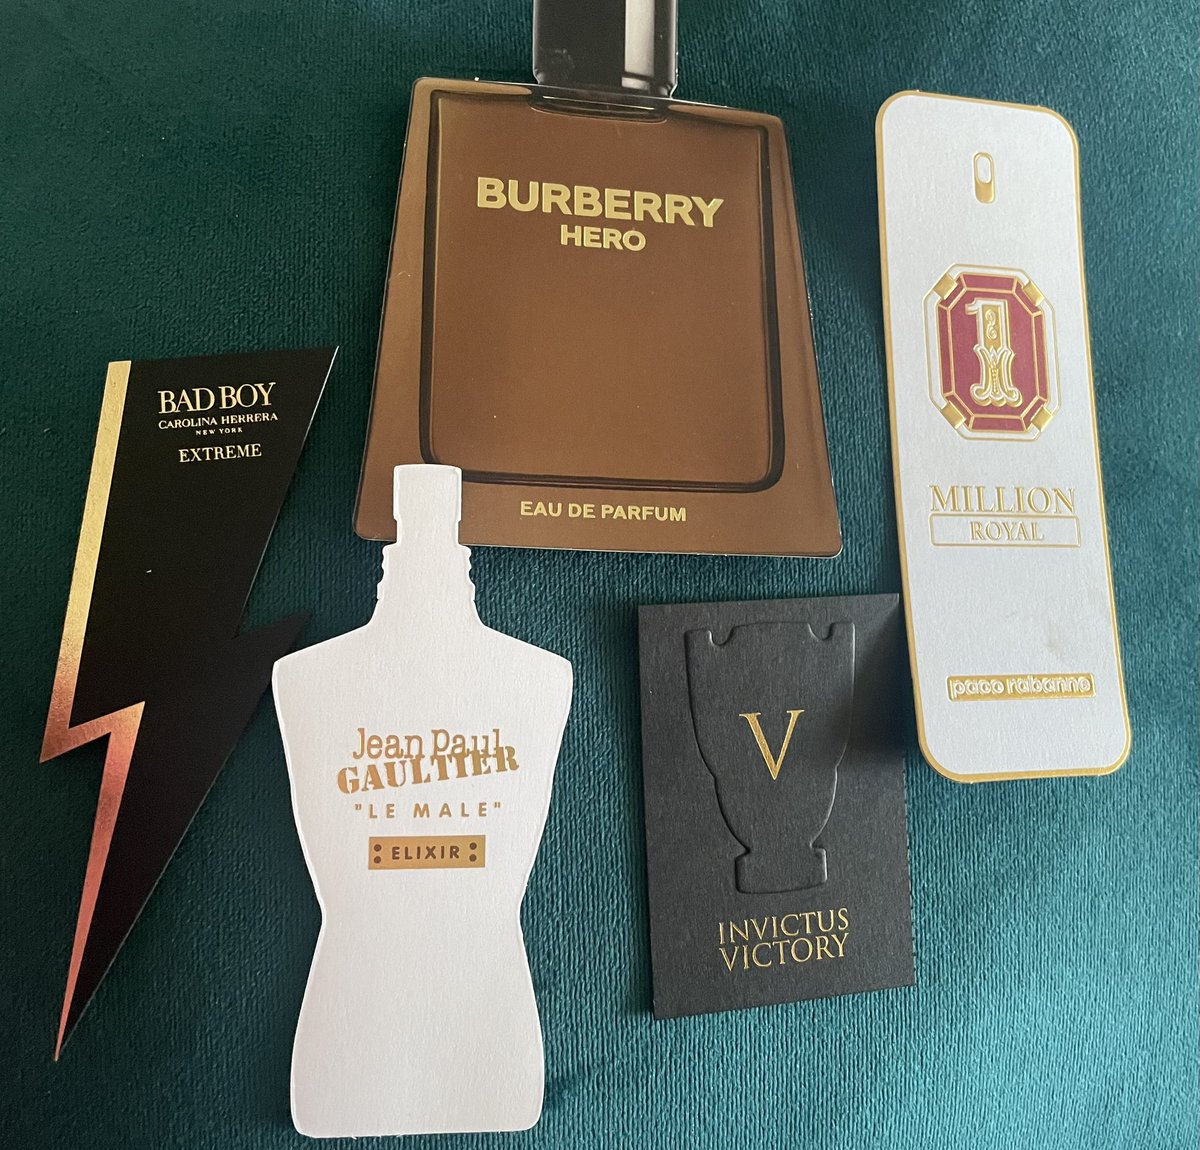 Whats your favourite after shave/cologne? 😍These were all lush…